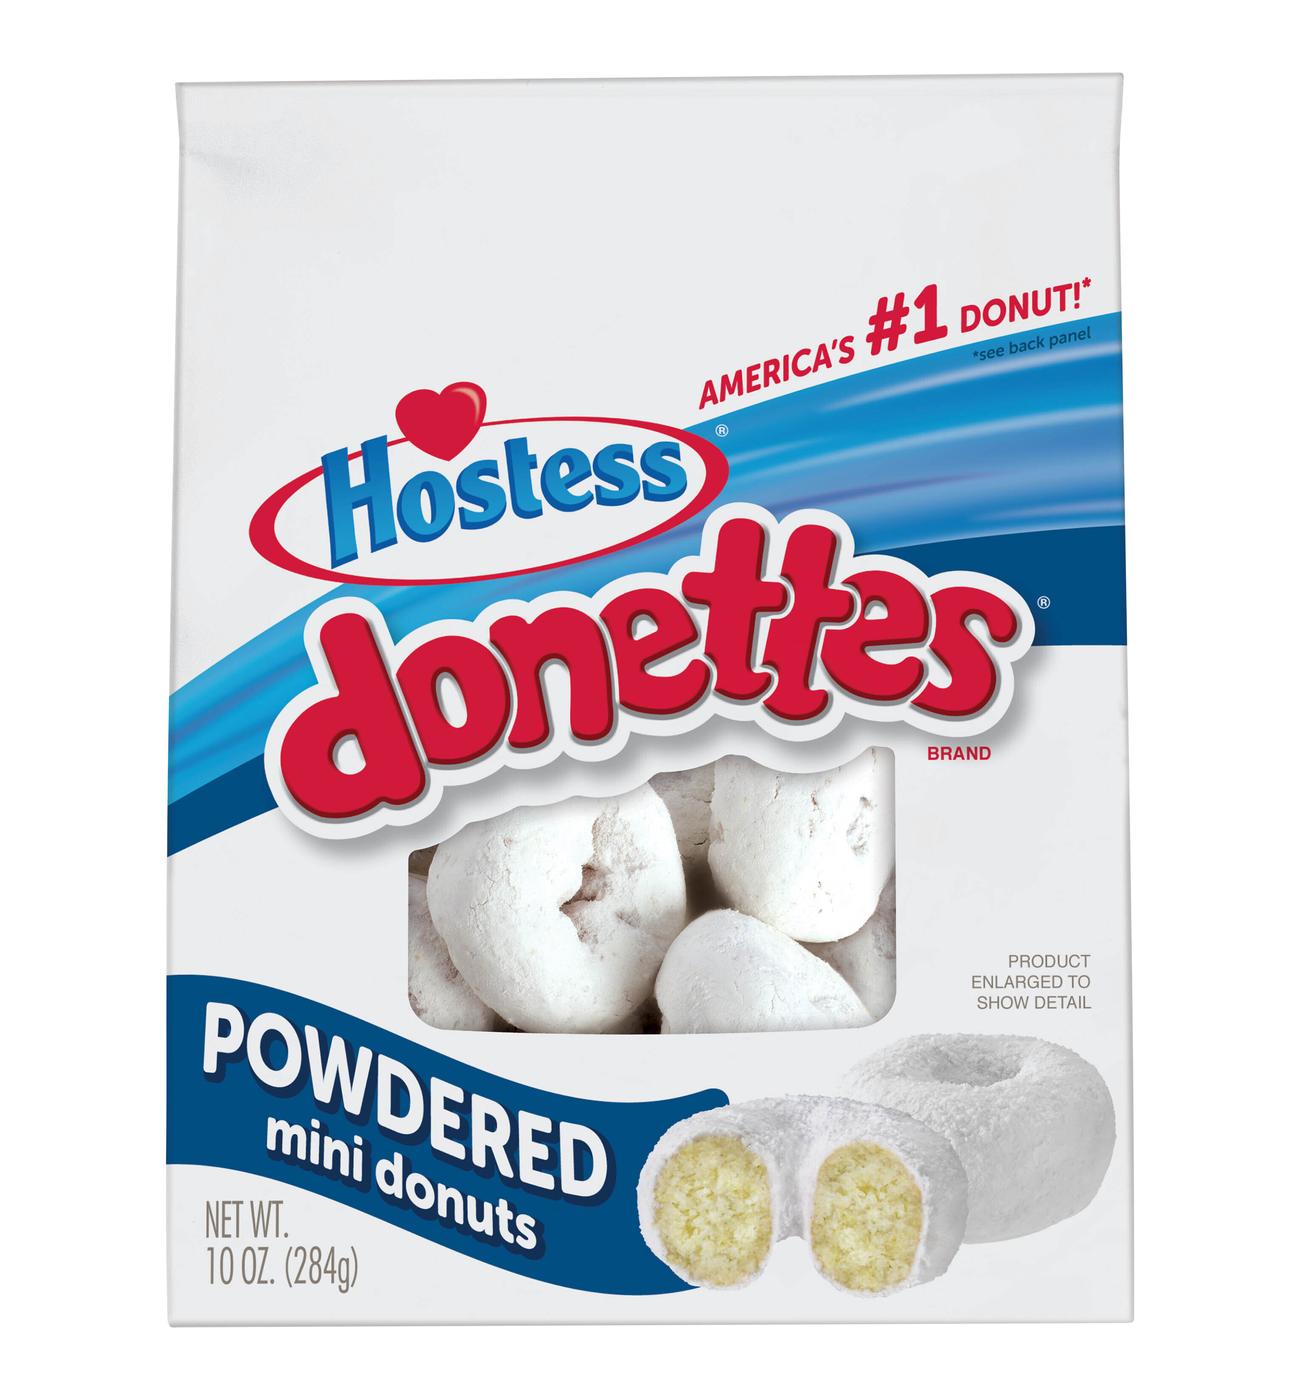 Hostess Donettes Powdered Mini Donuts; image 1 of 6